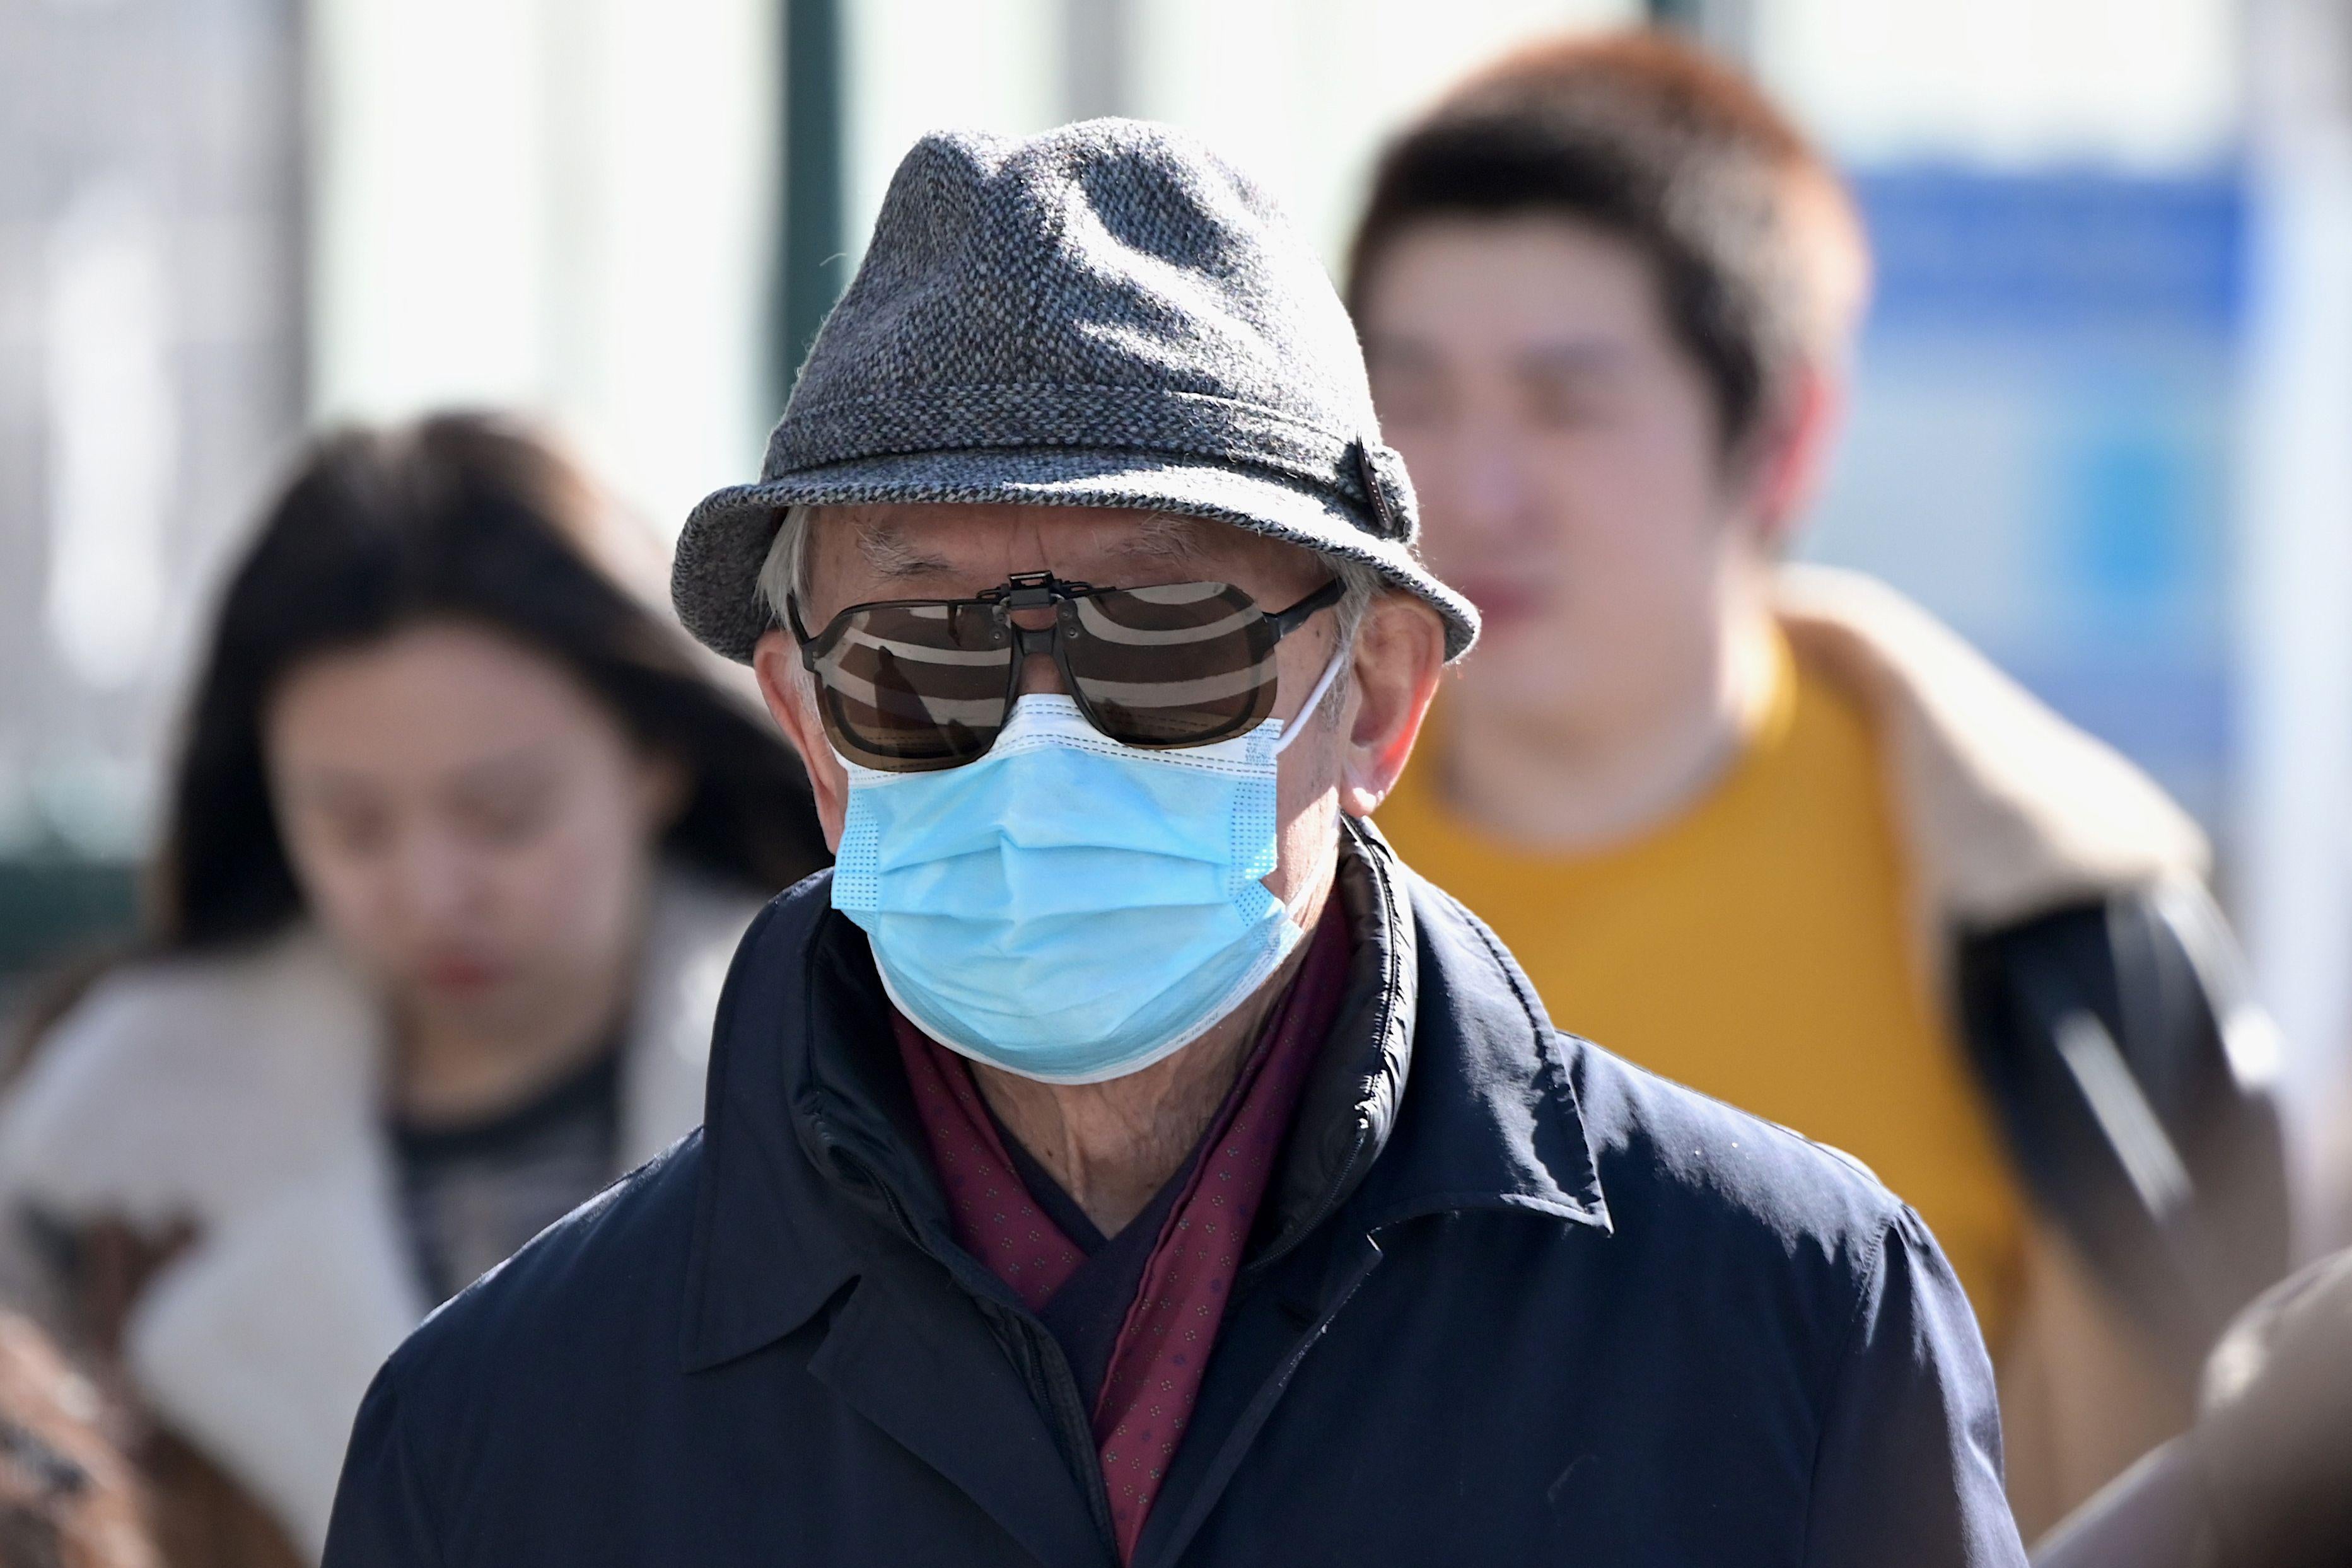 Man wearing a surgical mask and sunglasses, walking outside.